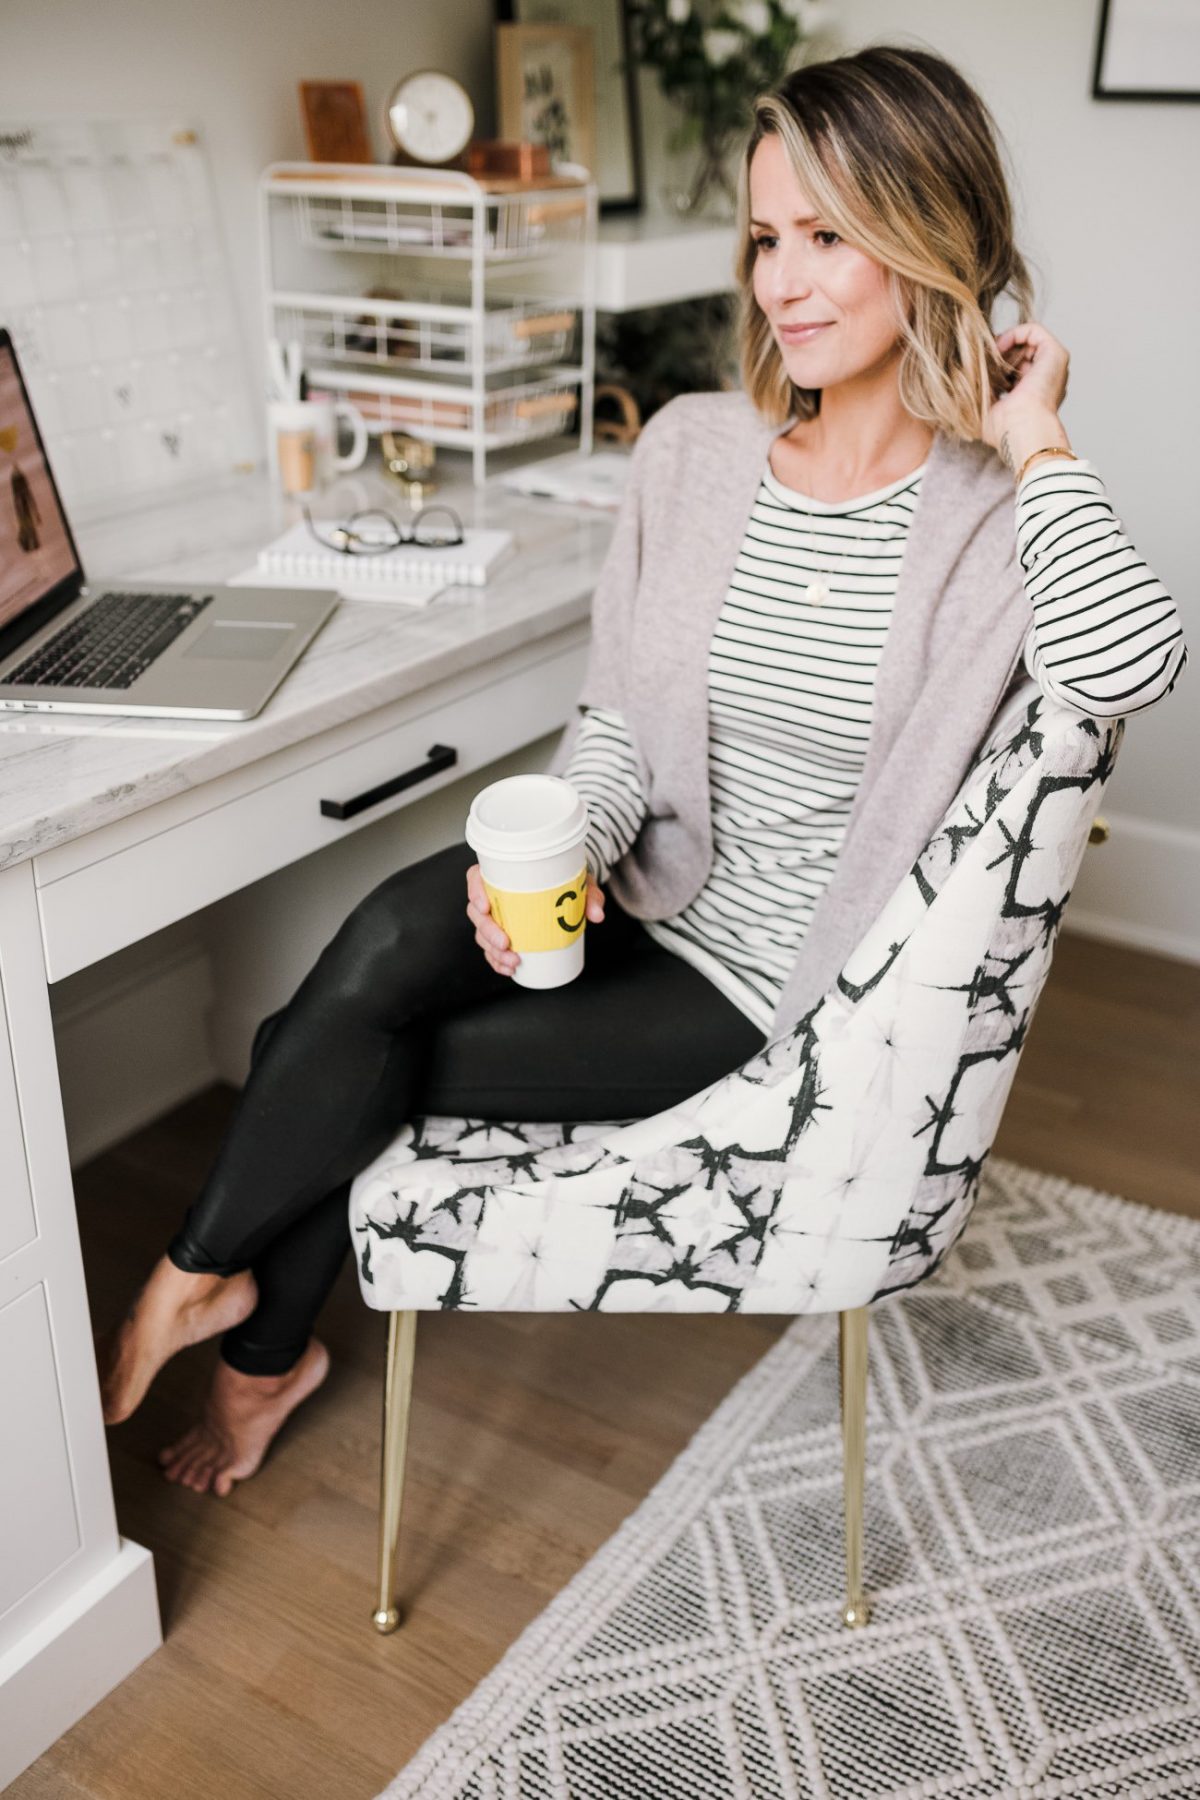 Suzanne sitting at her desk wearing a striped tee, Spanx faux leather leggings, and a cashmere rauna